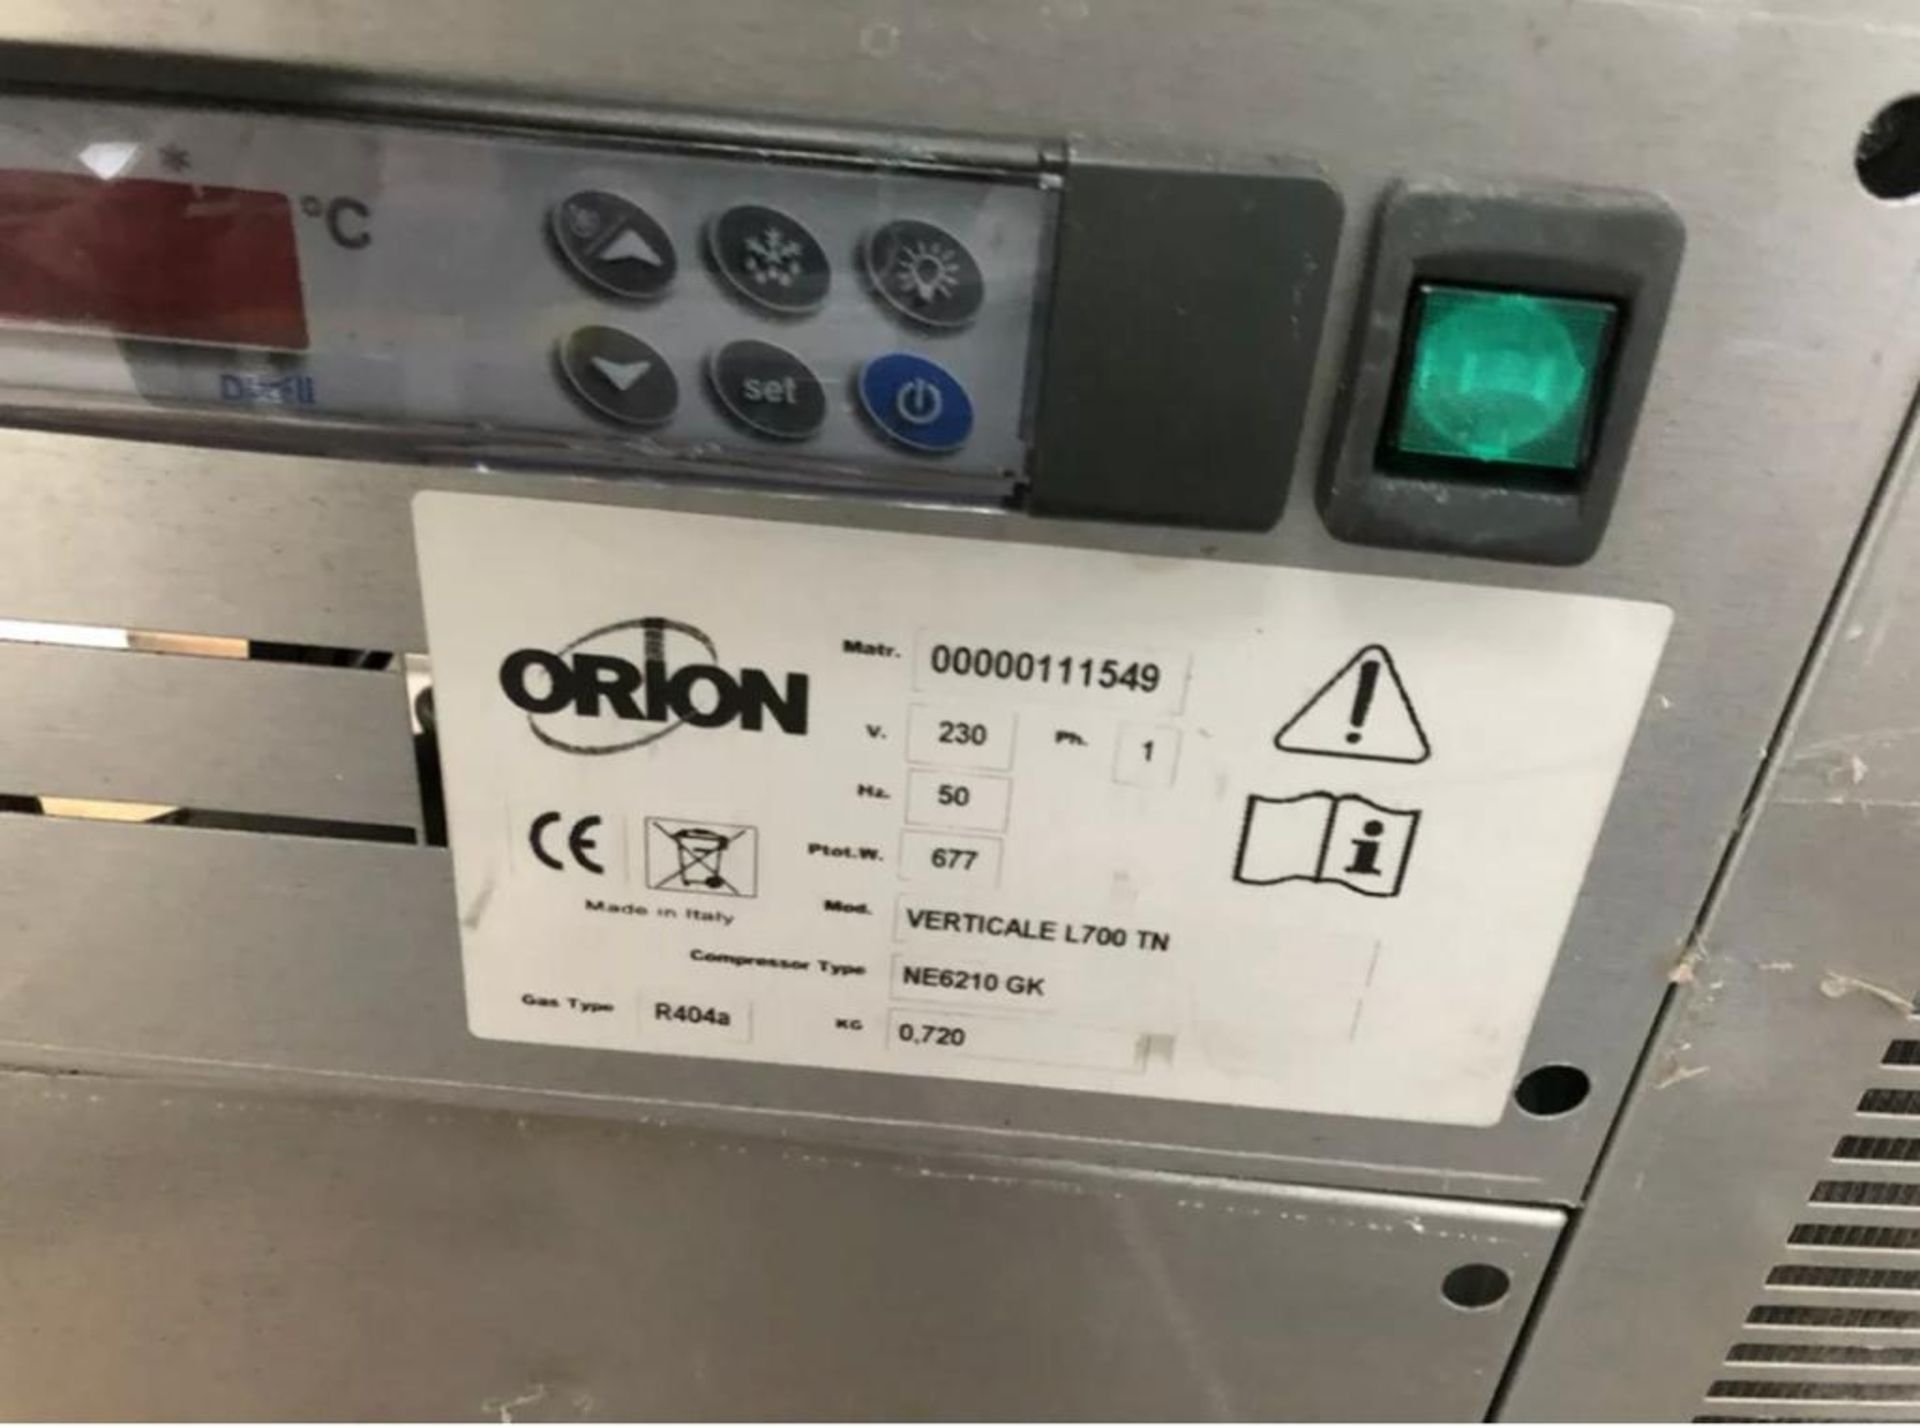 1 x Orion Refrigerated Display Chiller - Model VERT L700 BT  - CL667 - Location: Brighton, Sussex, - Image 4 of 4